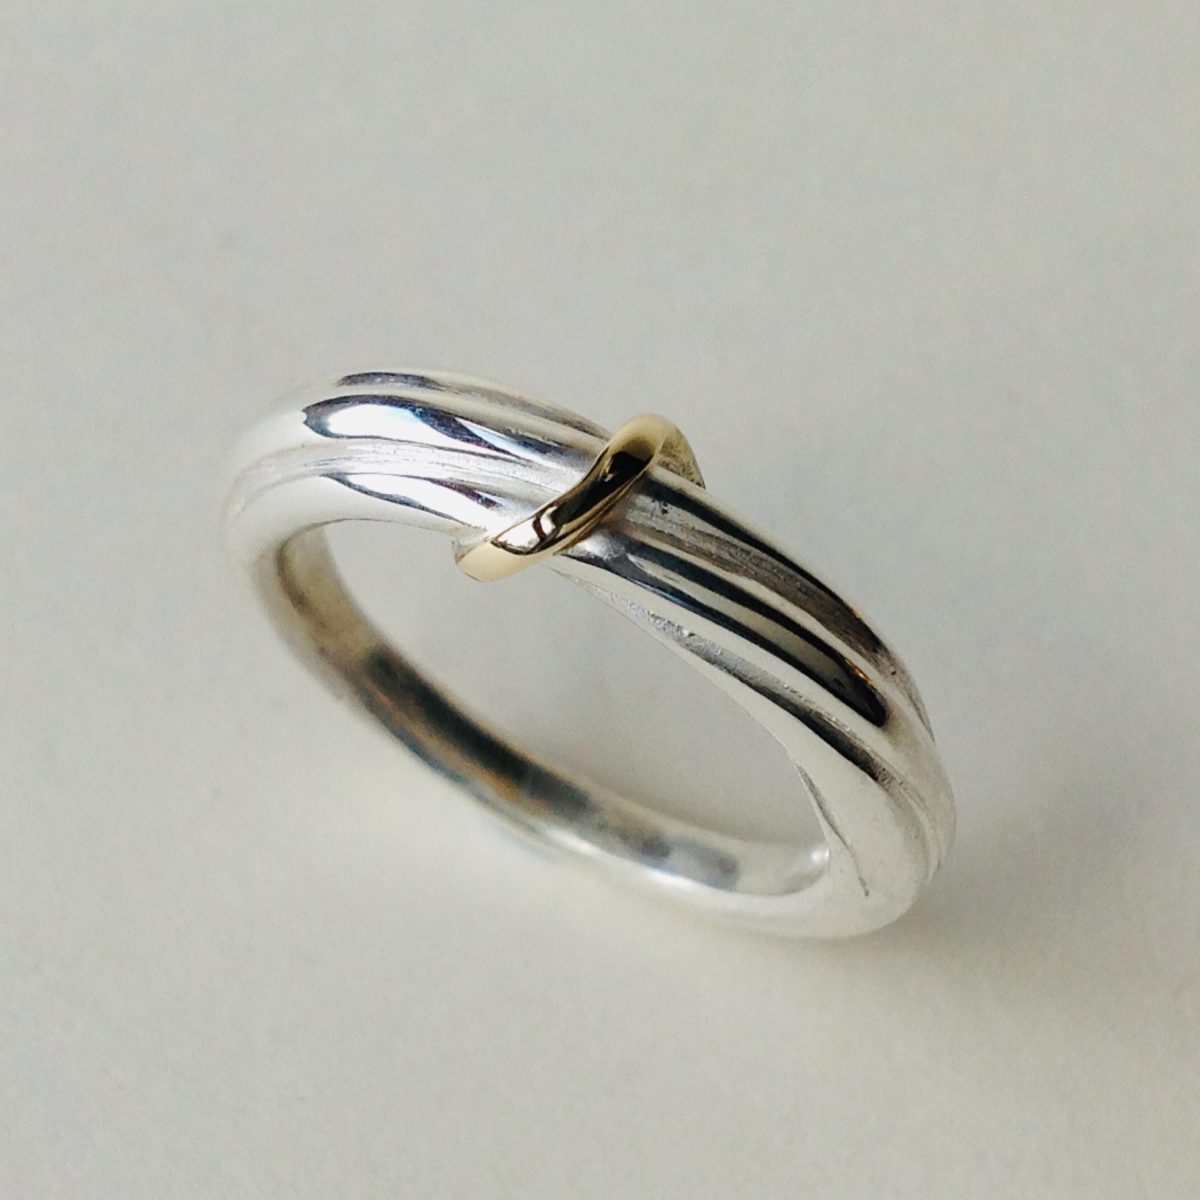 'Twist' Silver Ring with 9ct Gold Band - Old Chapel Gallery